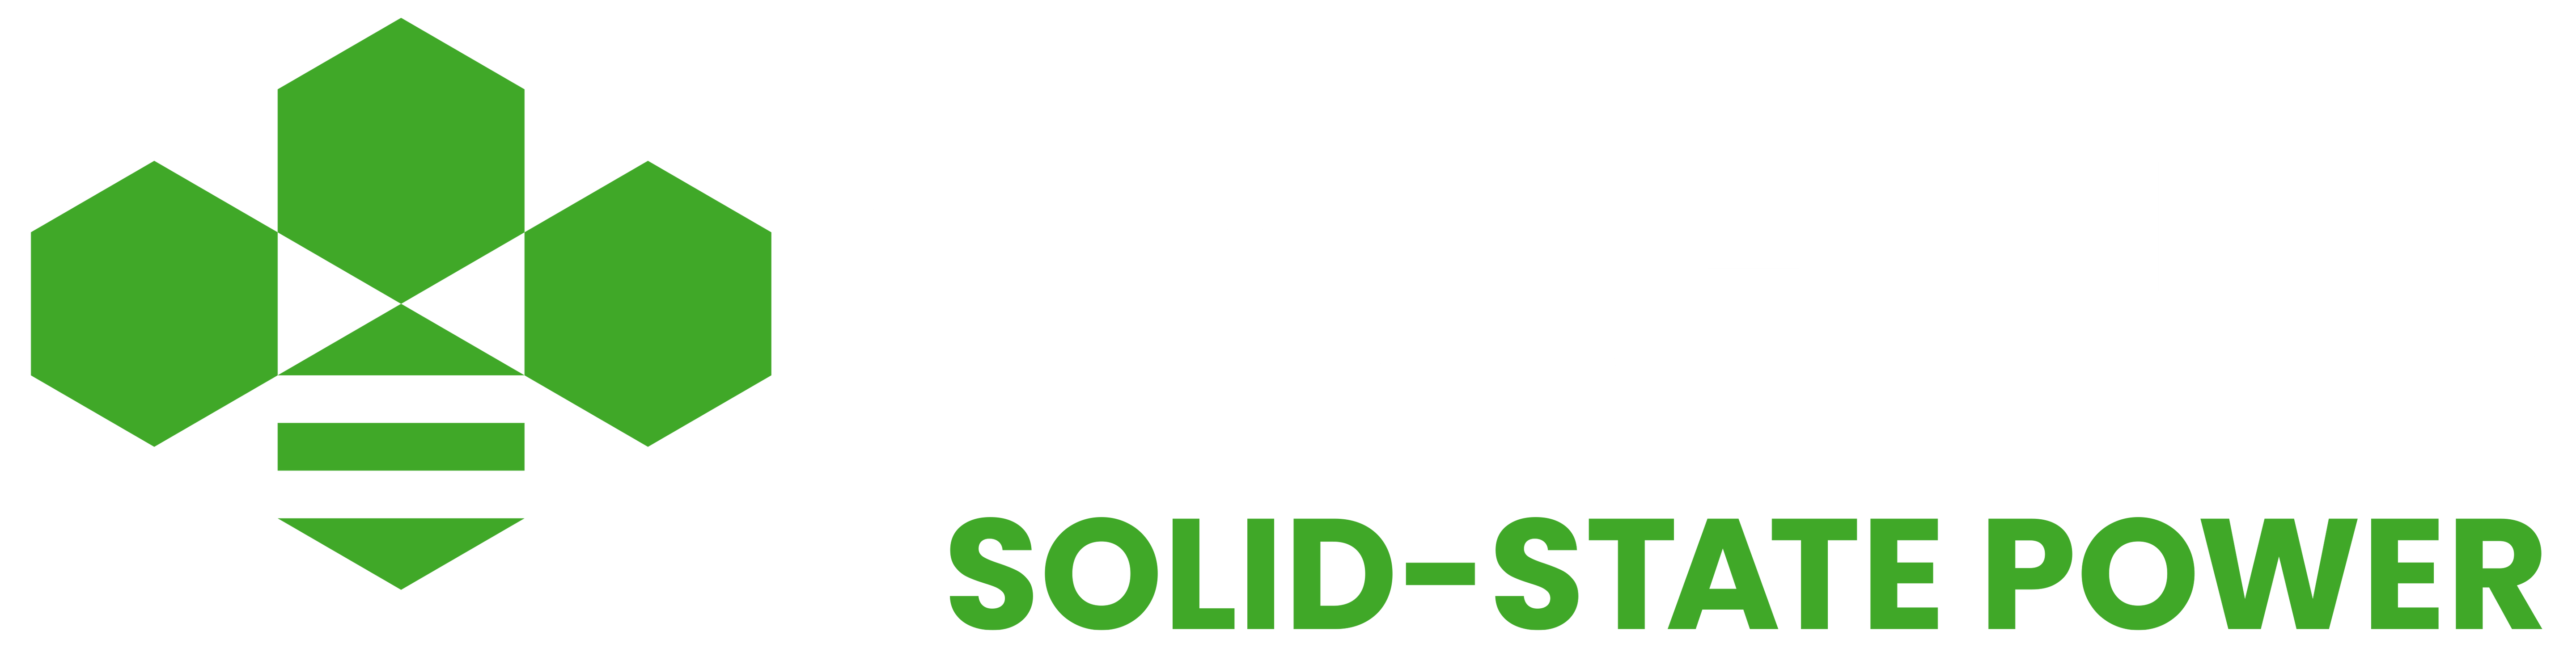 Yoshino Power Logo - White with Green 'Solid-State Power' Text